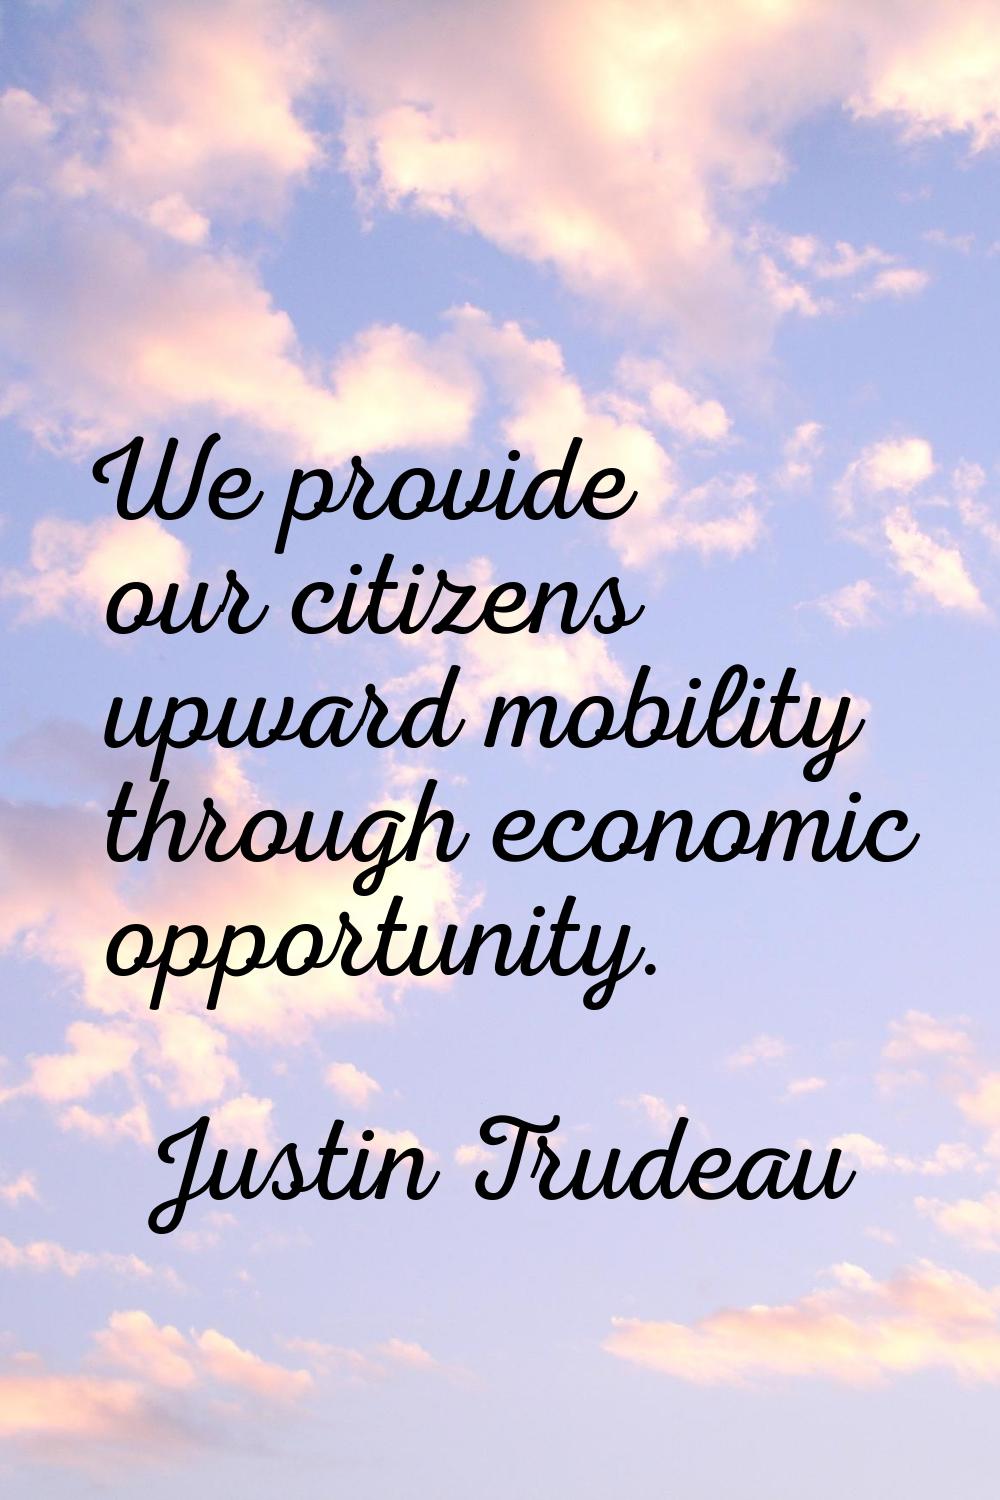 We provide our citizens upward mobility through economic opportunity.